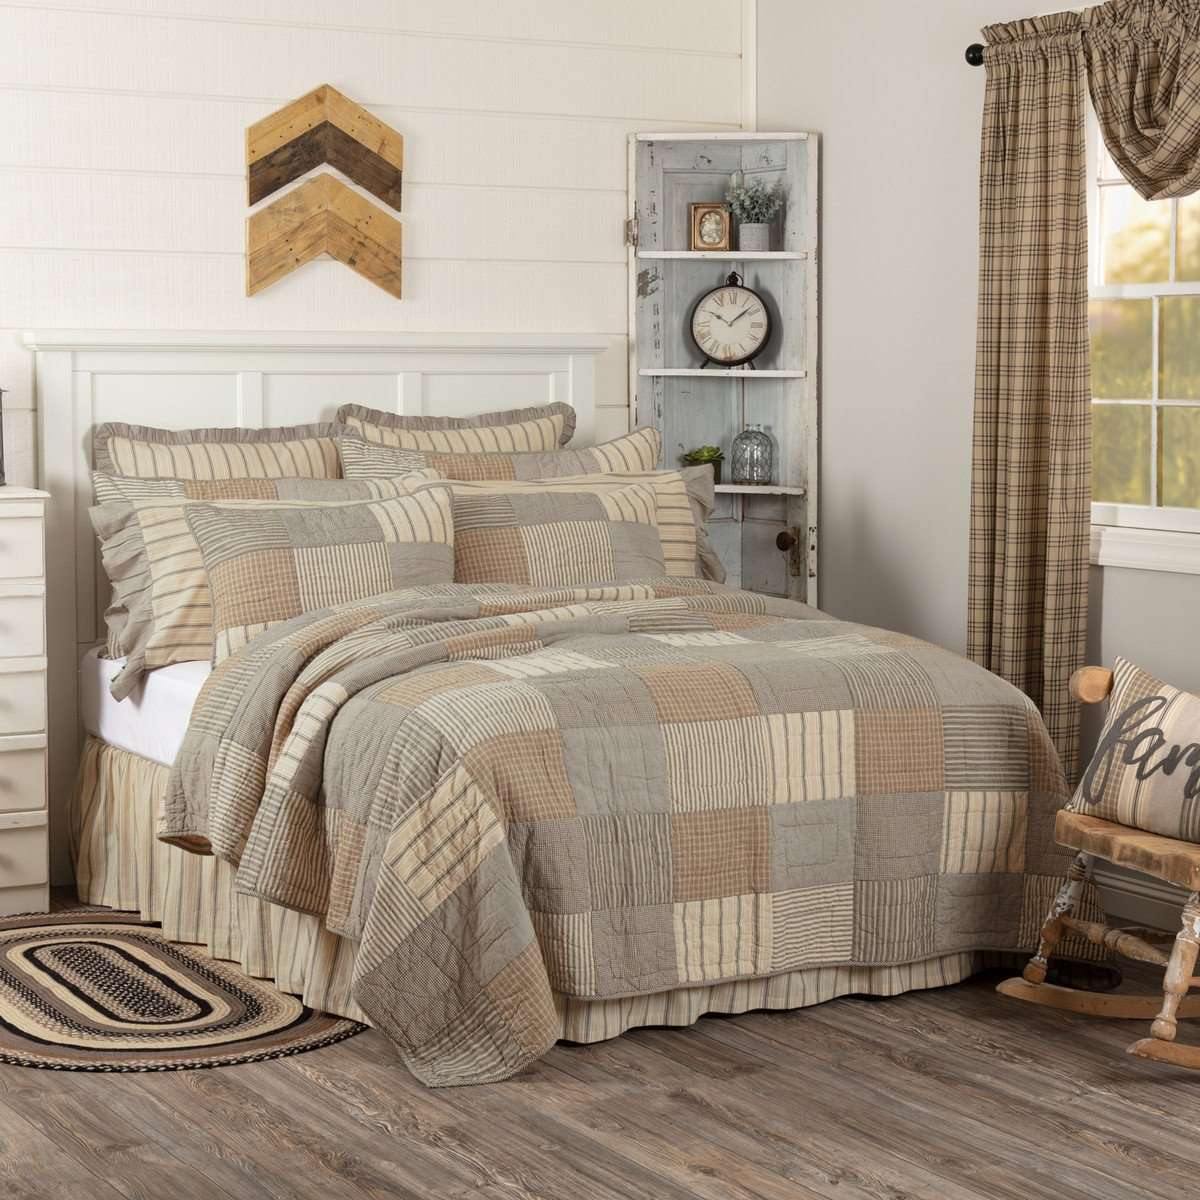 Sawyer Mill Charcoal Luxury King Quilt 120Wx105L VHC Brands